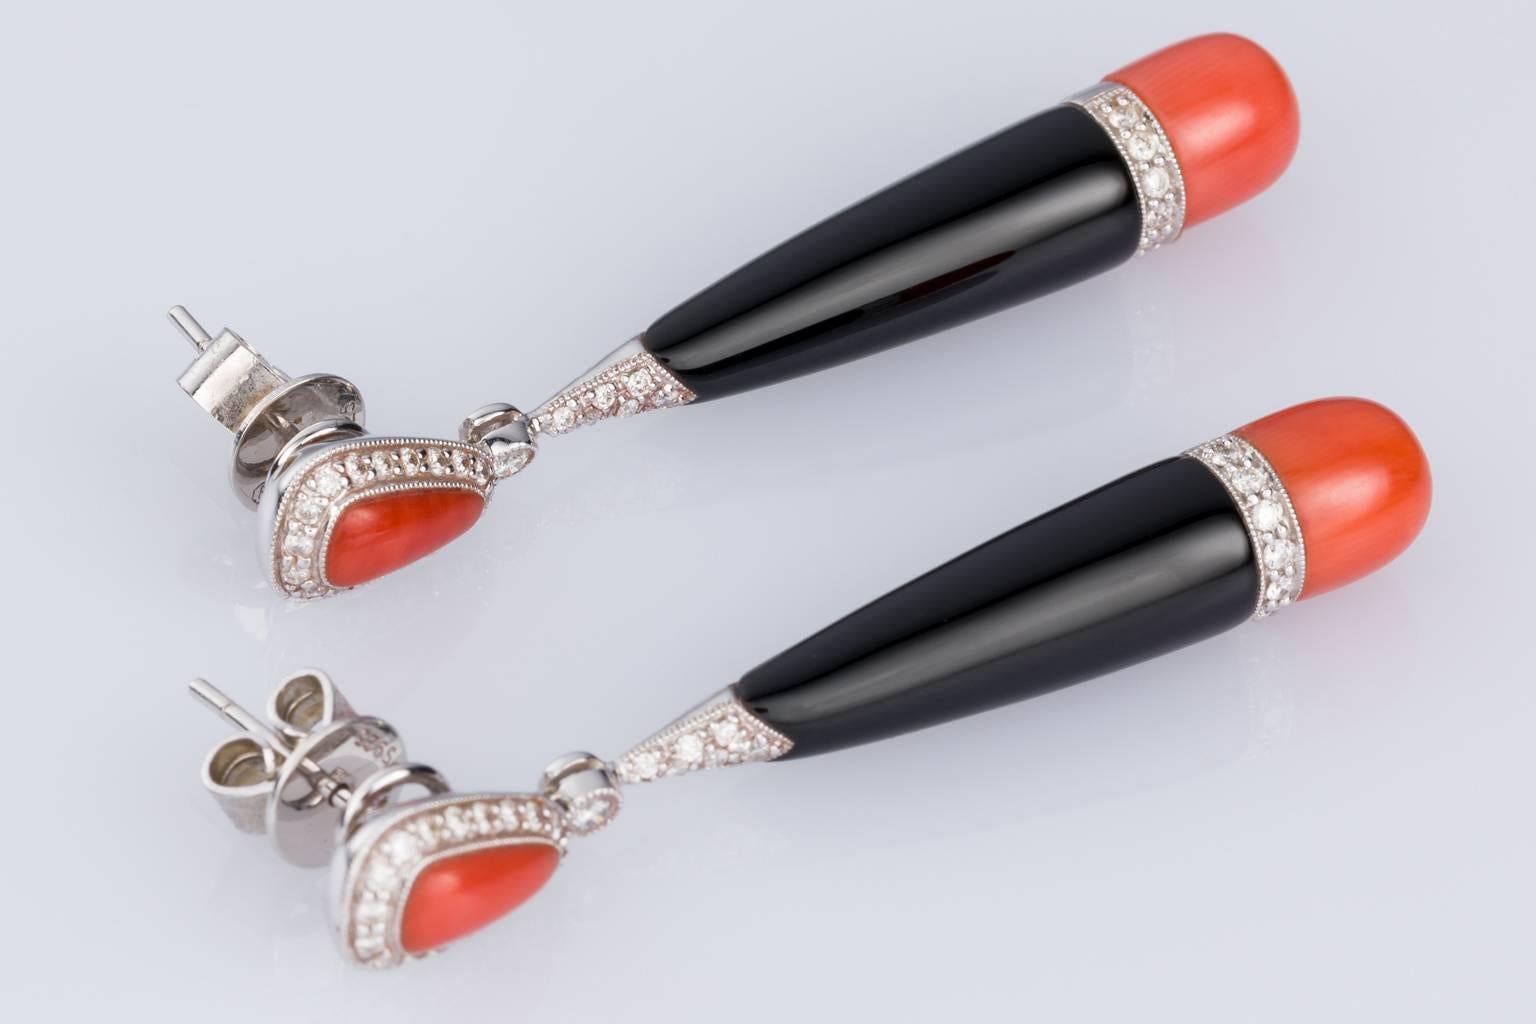 Fabulous for day or night these earrings convert so you can wear them both ways. For day time just wear the coral and diamond stud section of the earrings, understated elegance. For the night time add the beautiful Onyx, coral and diamond drop